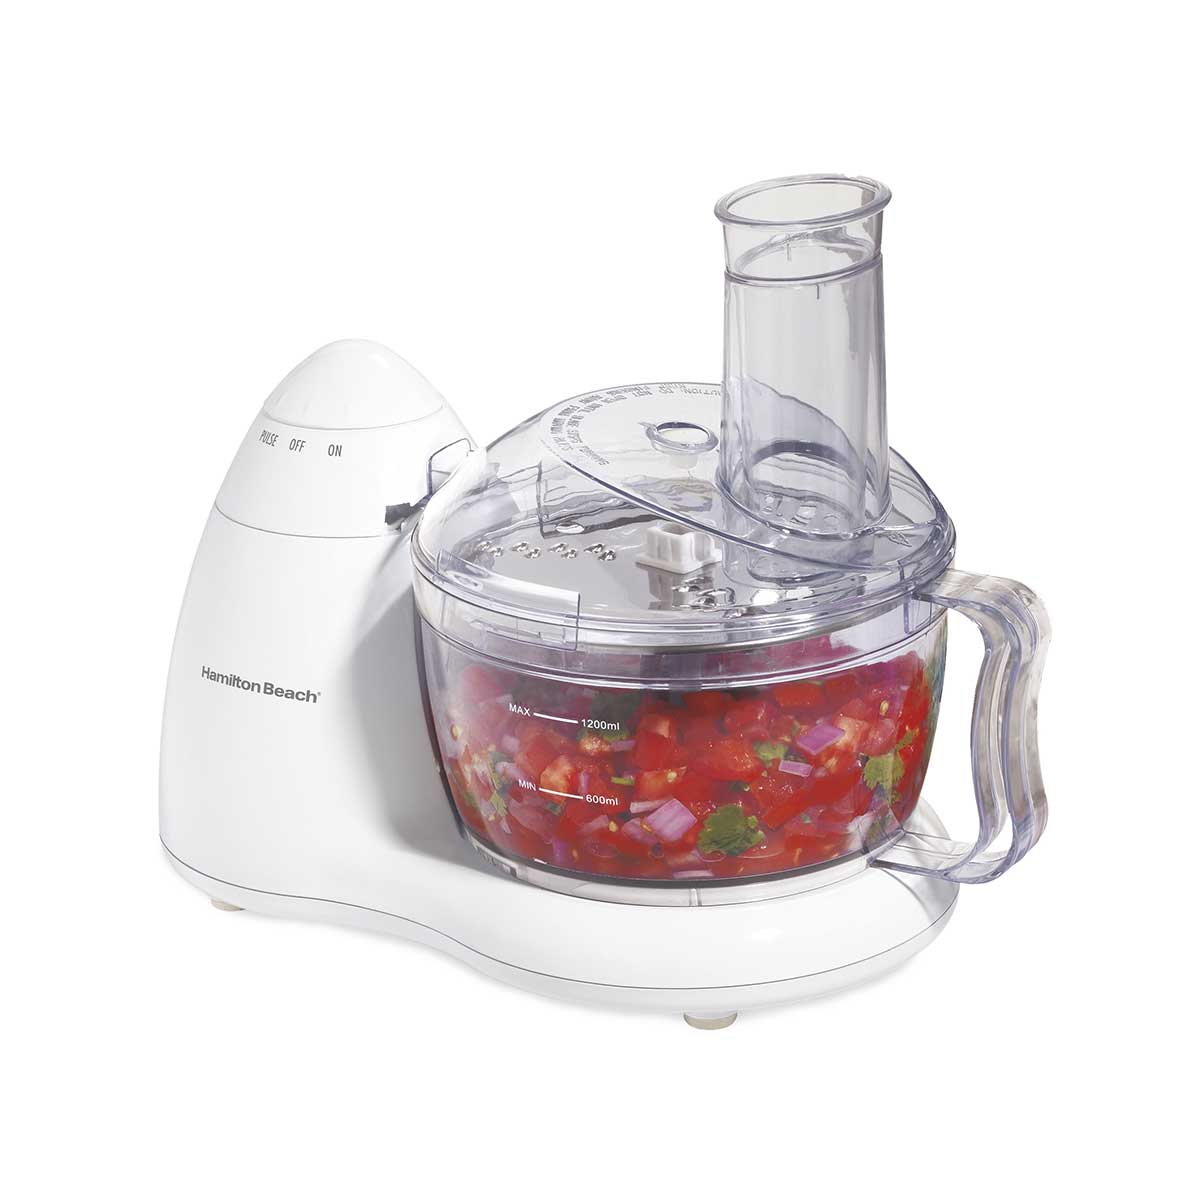 8-Cup Food Processor with 2 Speeds plus Pulse, White (70450)